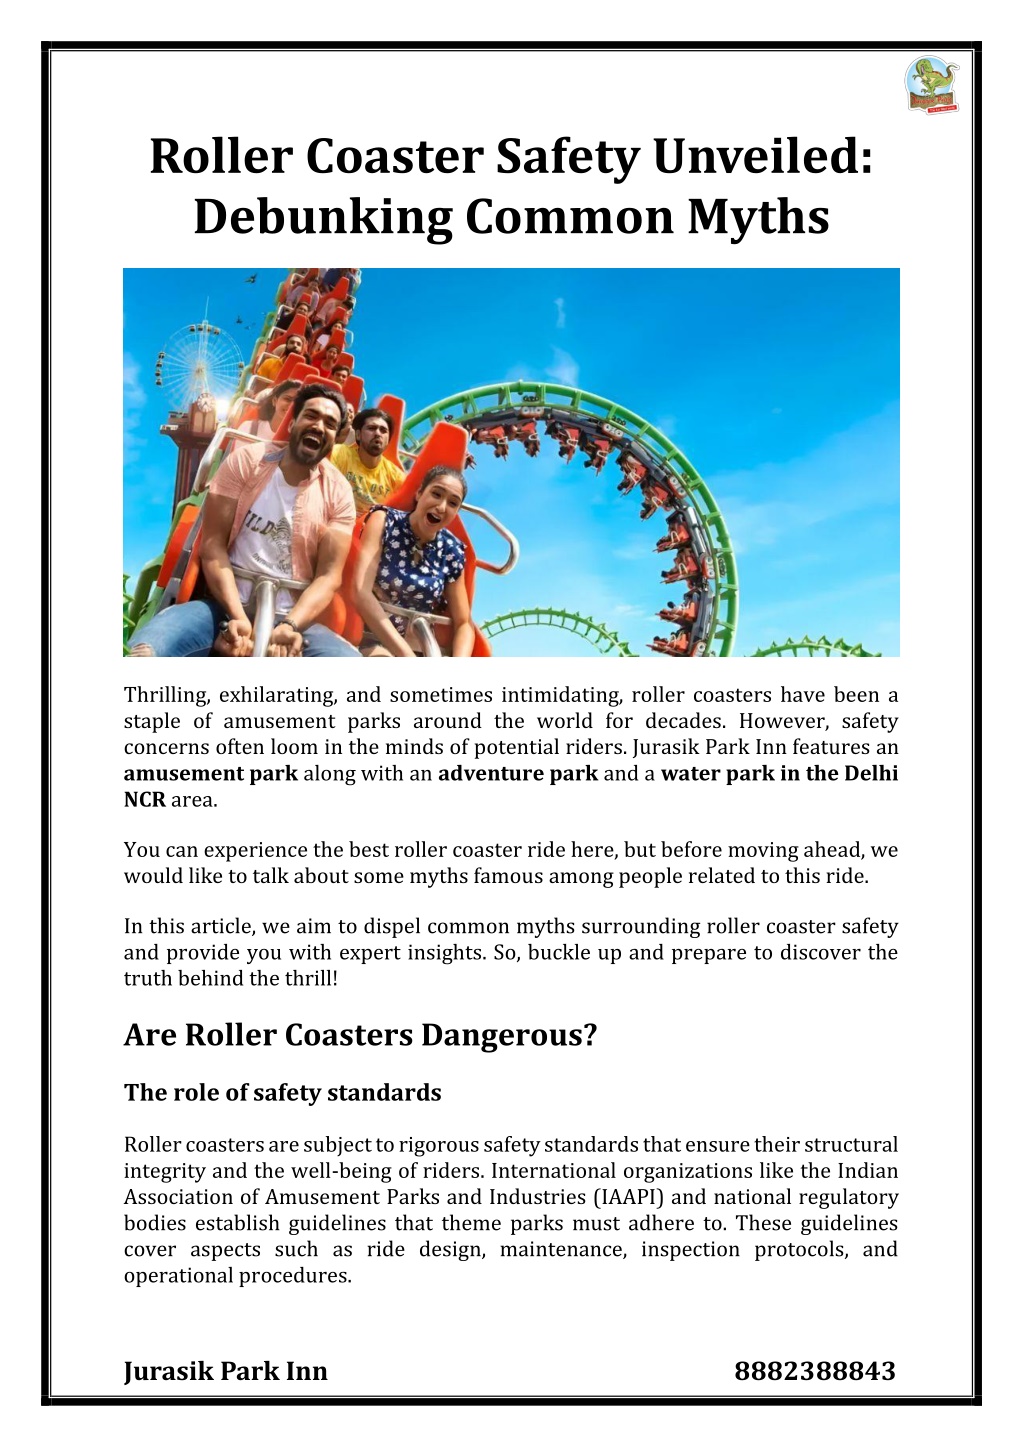 PPT - Roller Coaster Safety Unveiled Debunking Common Myths PowerPoint ...